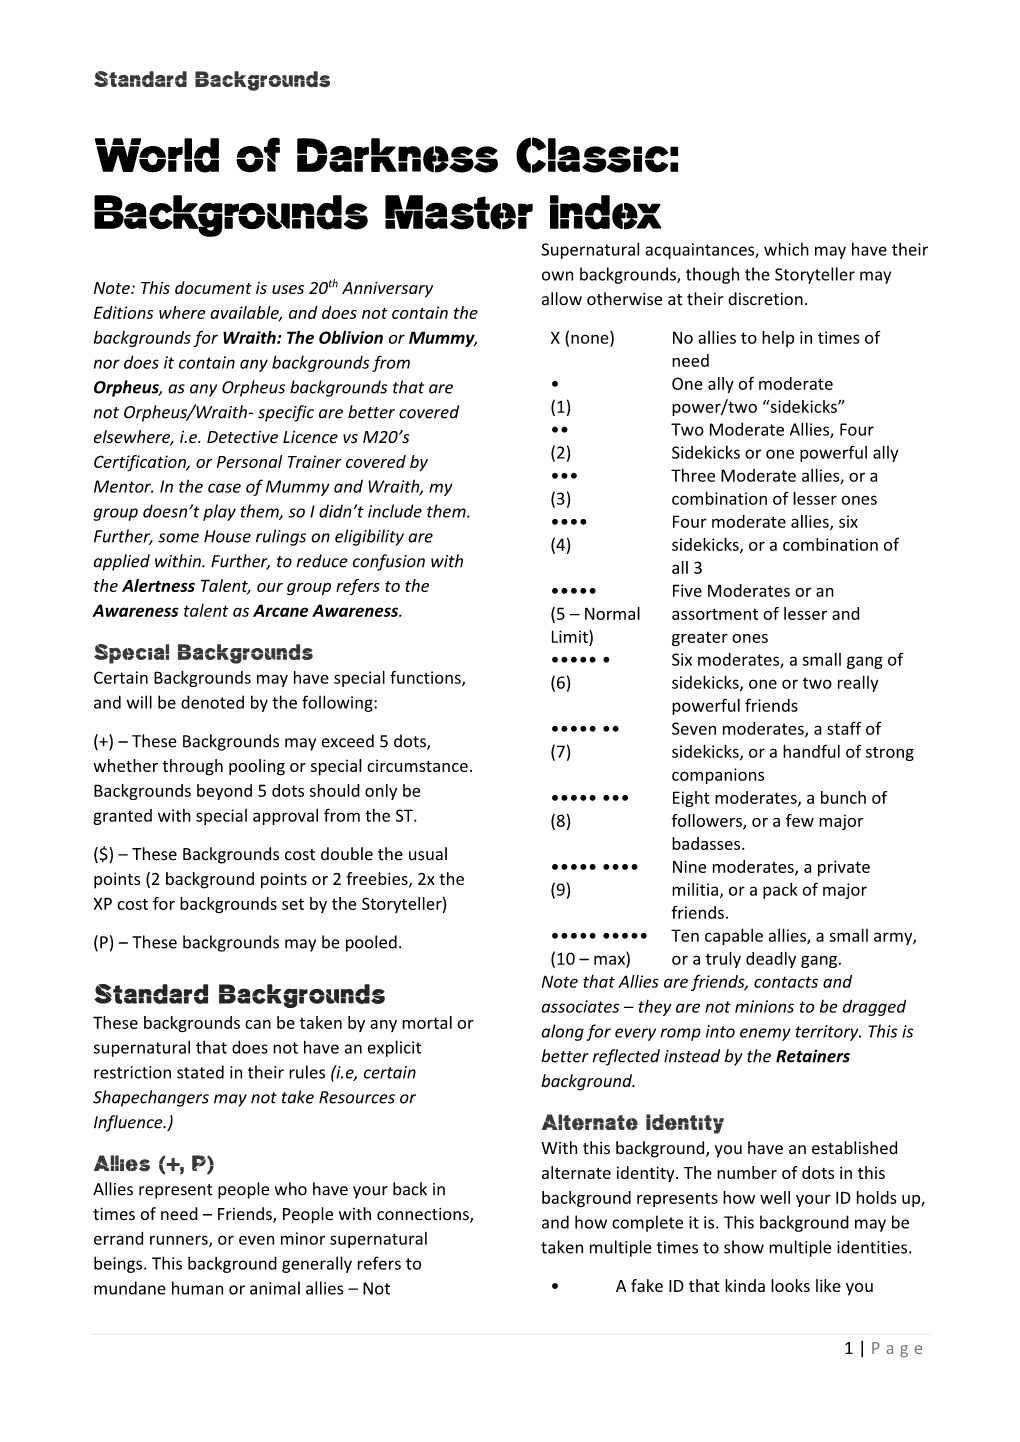 World of Darkness Classic: Backgrounds Master Index